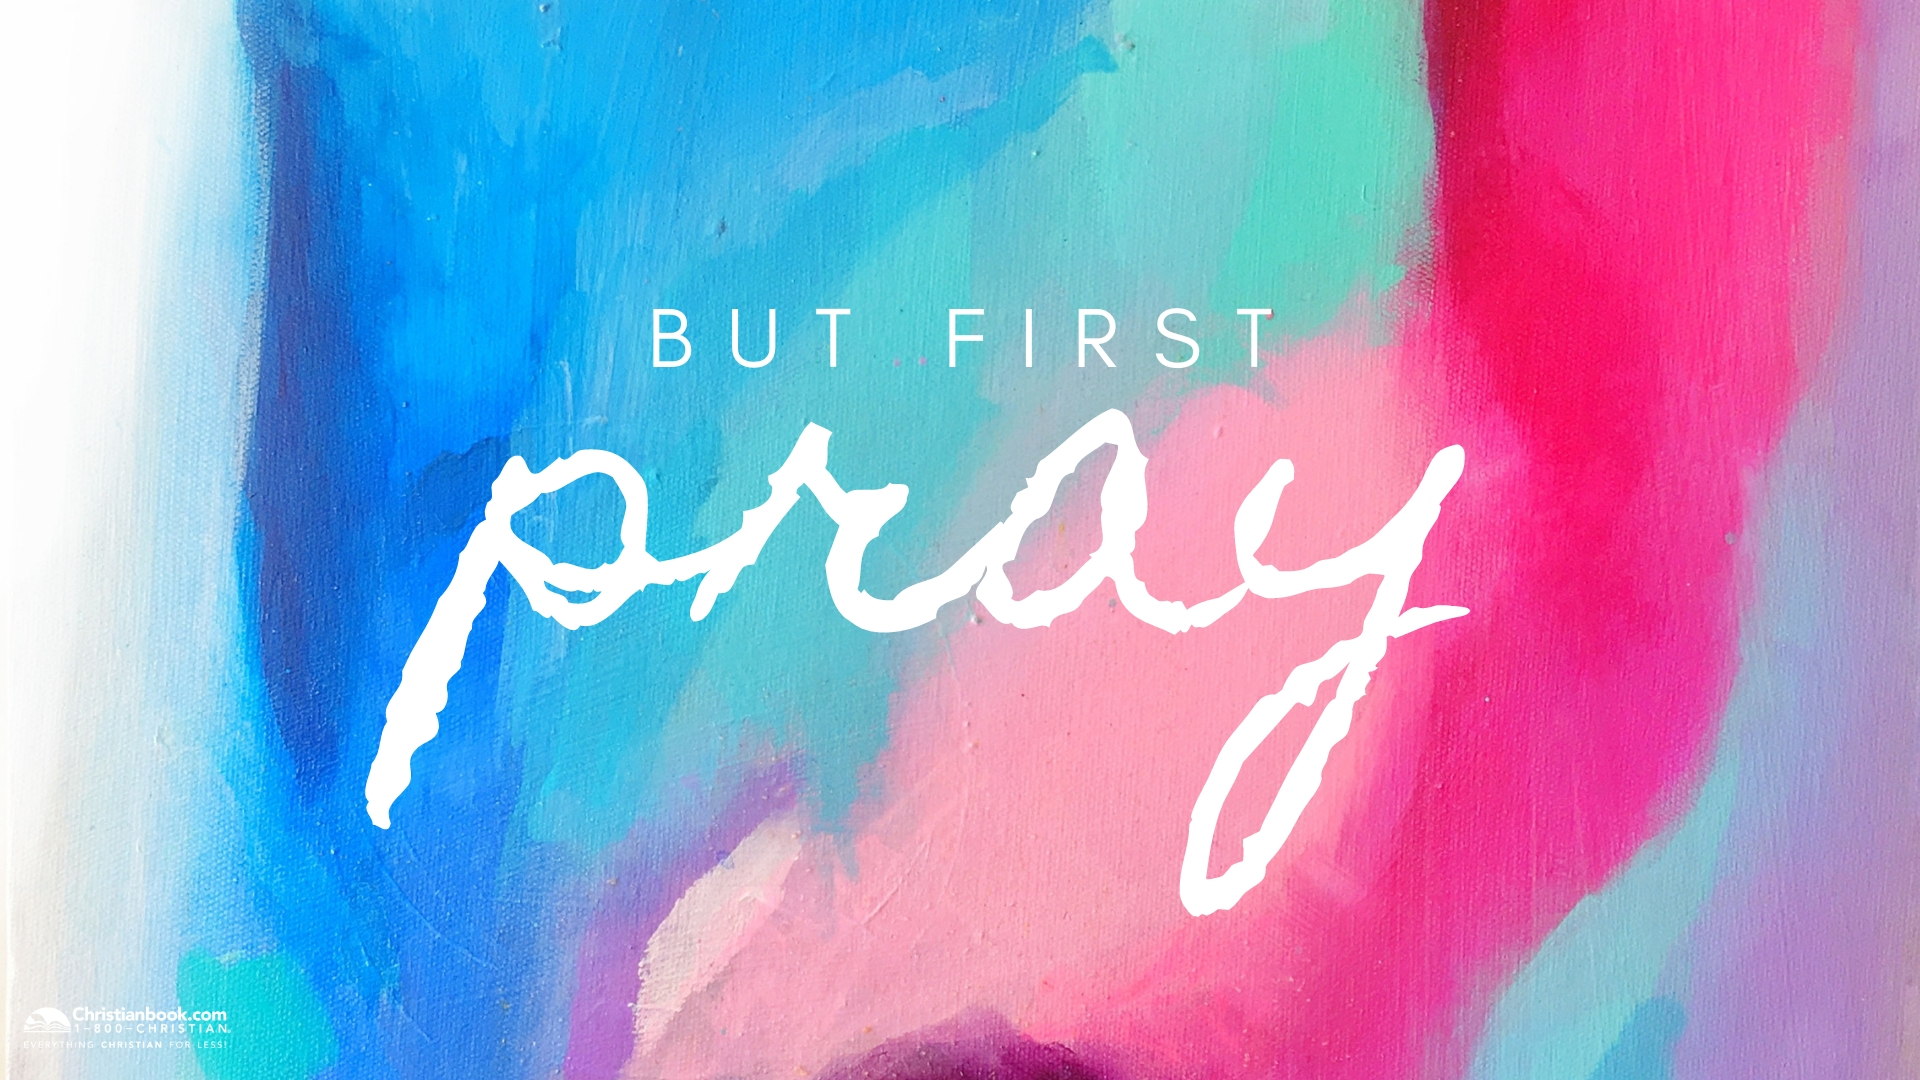 But First, Pray - Painting - HD Wallpaper 